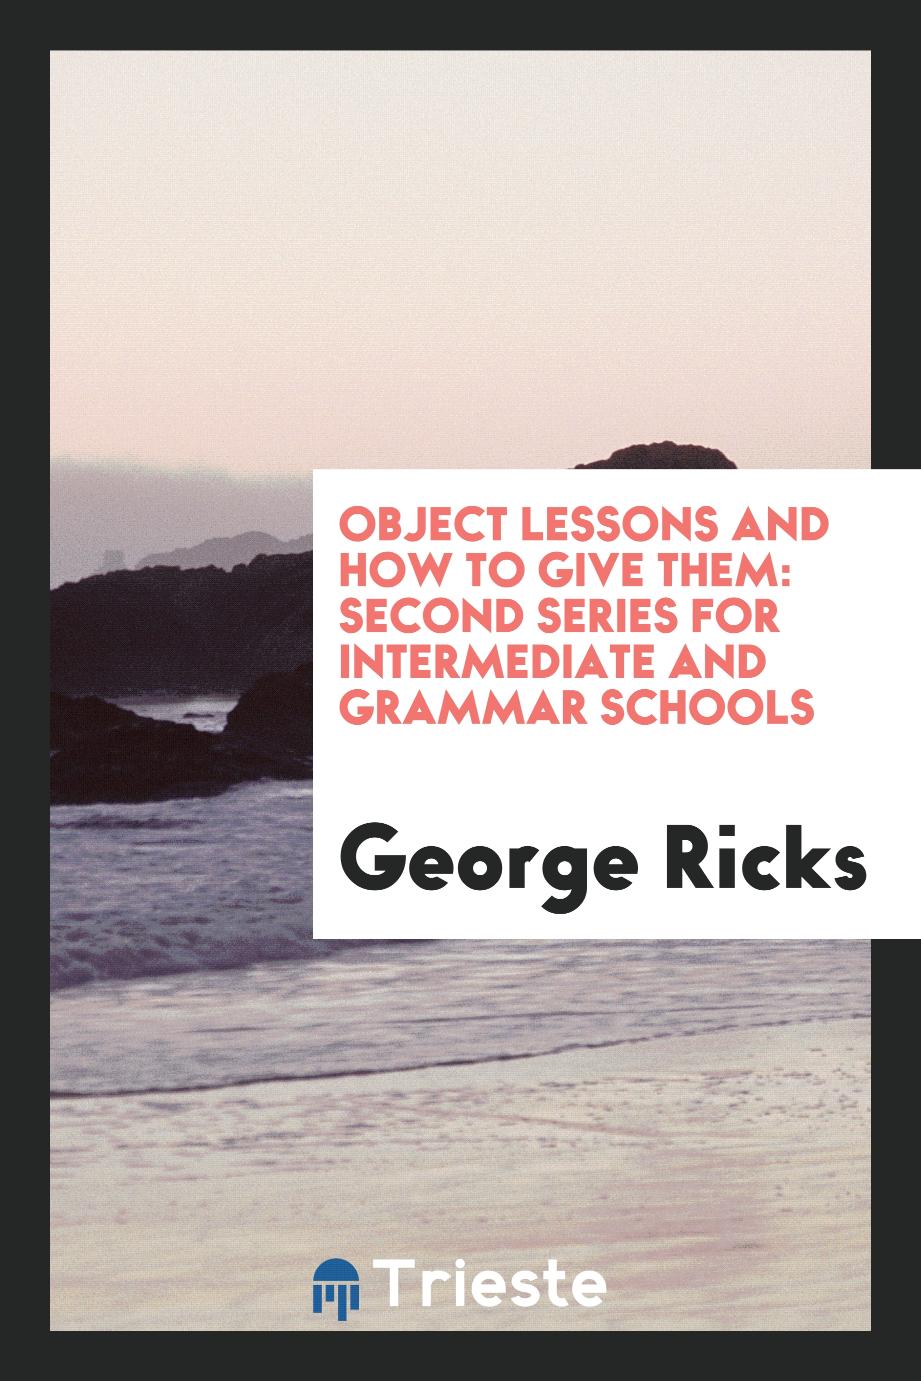 Object Lessons and How to Give Them: Second Series for Intermediate and Grammar Schools